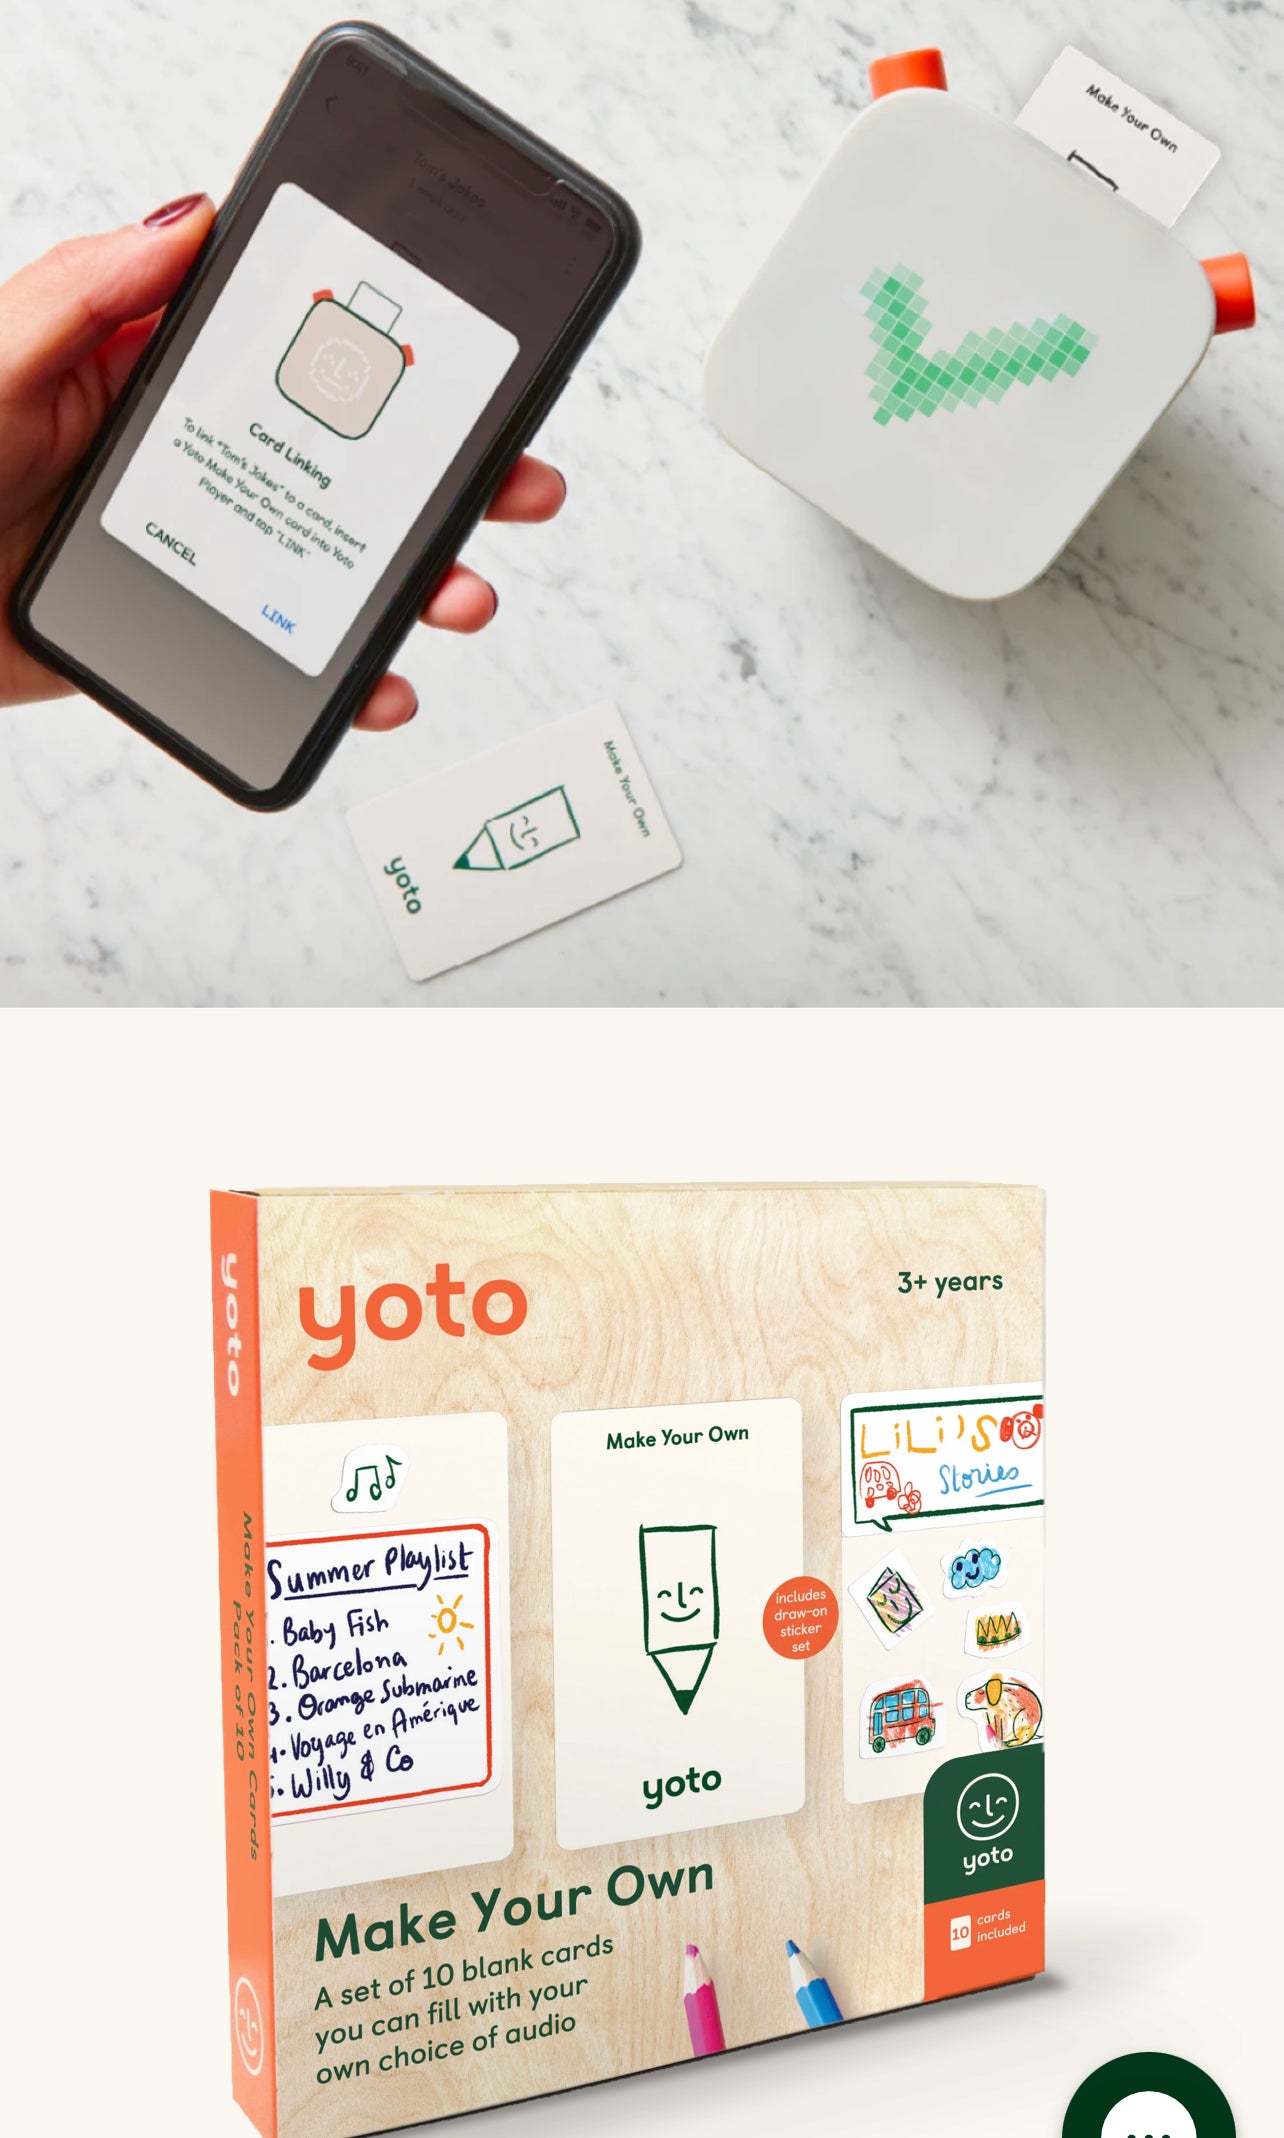 Make your own yoto cards (10 pack)